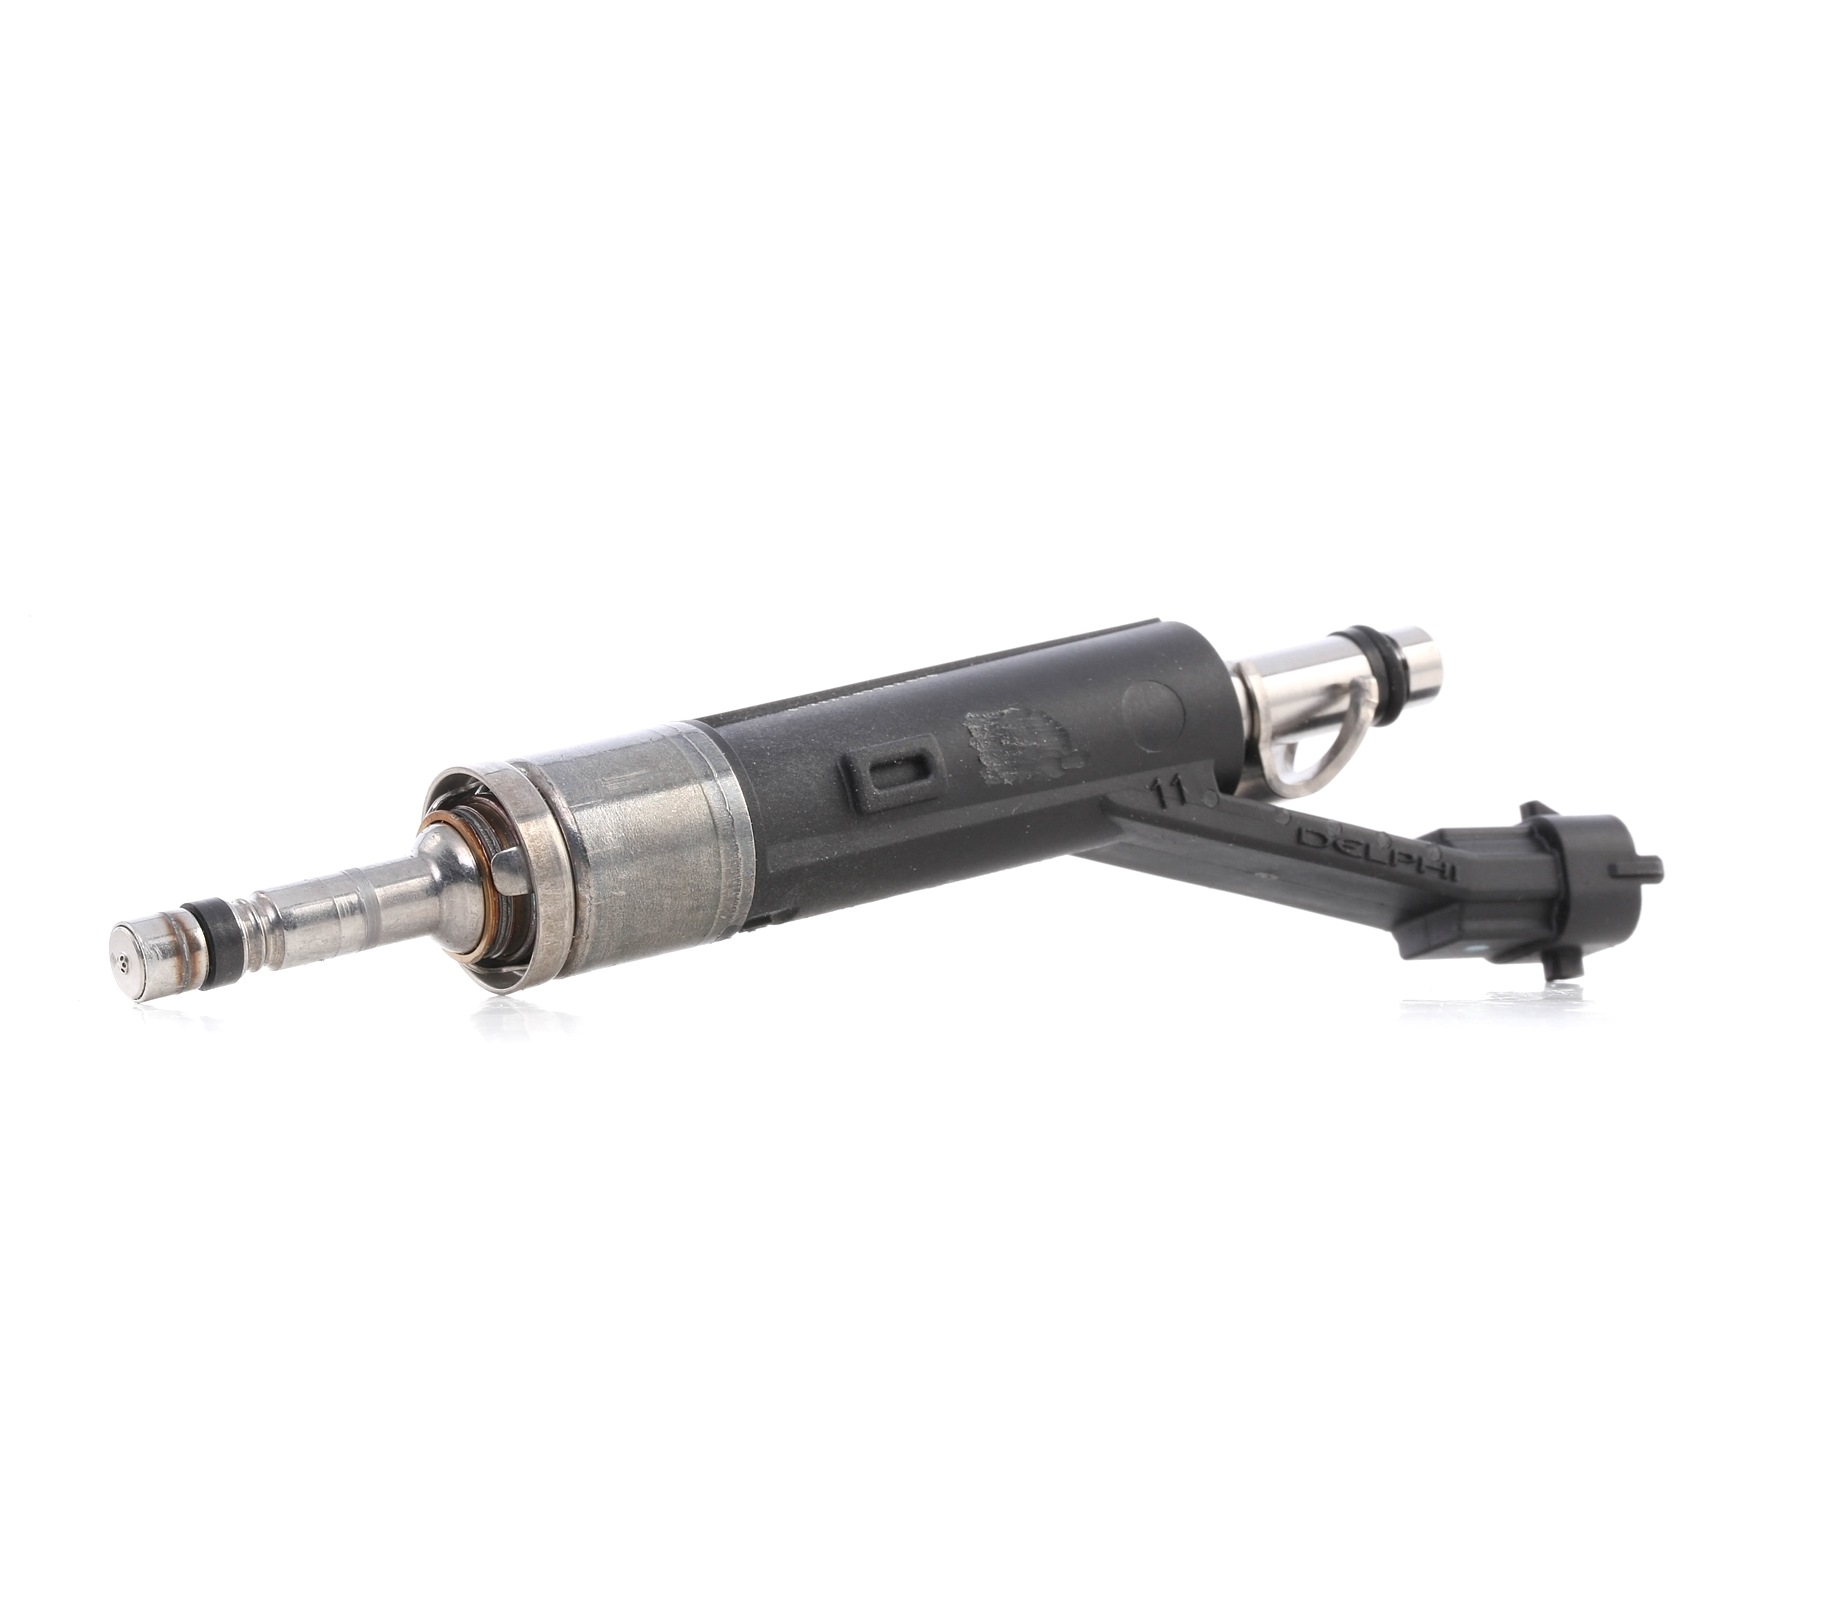 Peugeot Injector DELPHI 28581176 at a good price